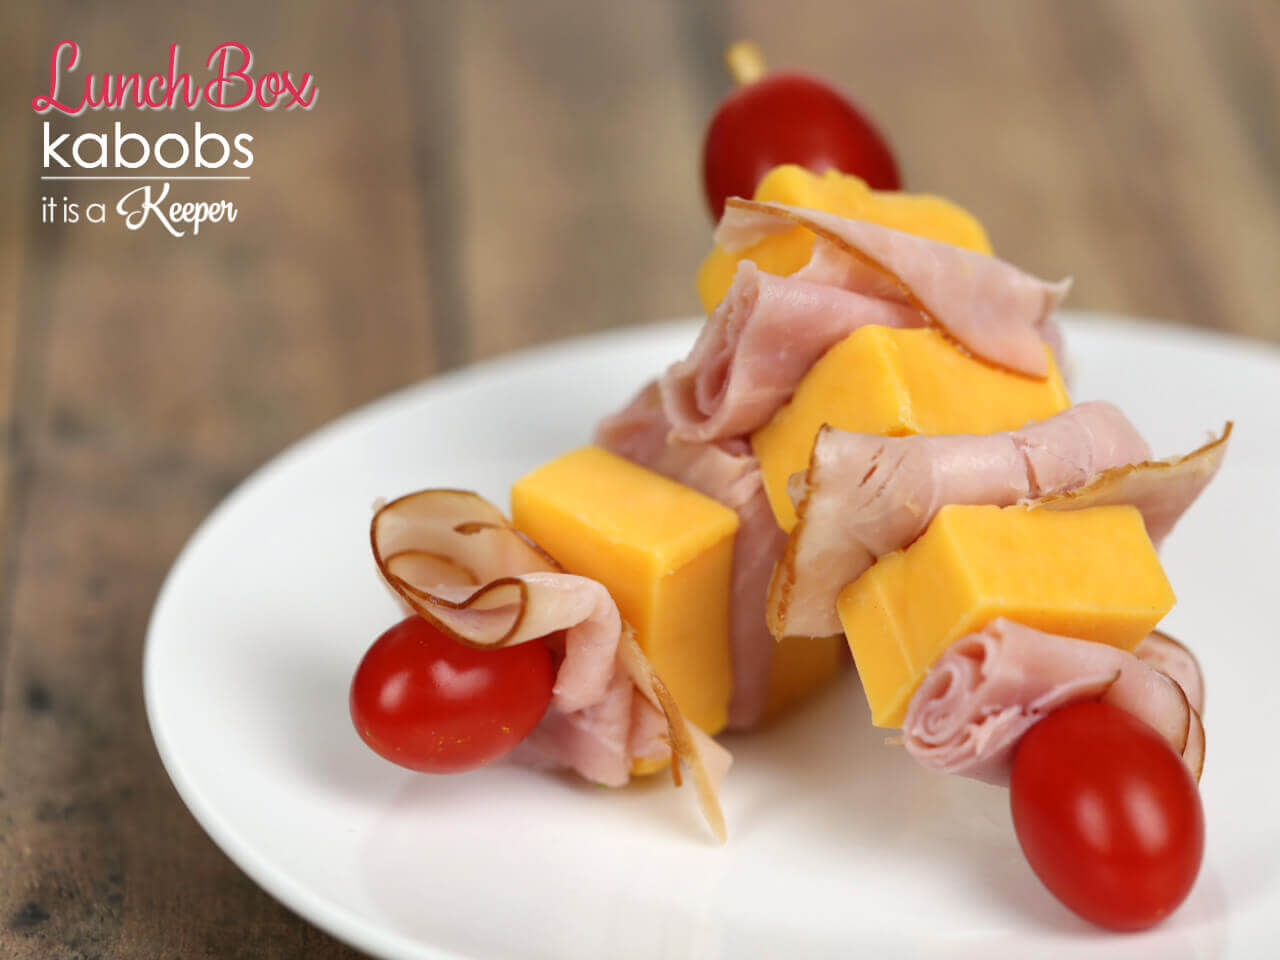 Lunch Box Kabobs - these are a fun kid approved lunch idea